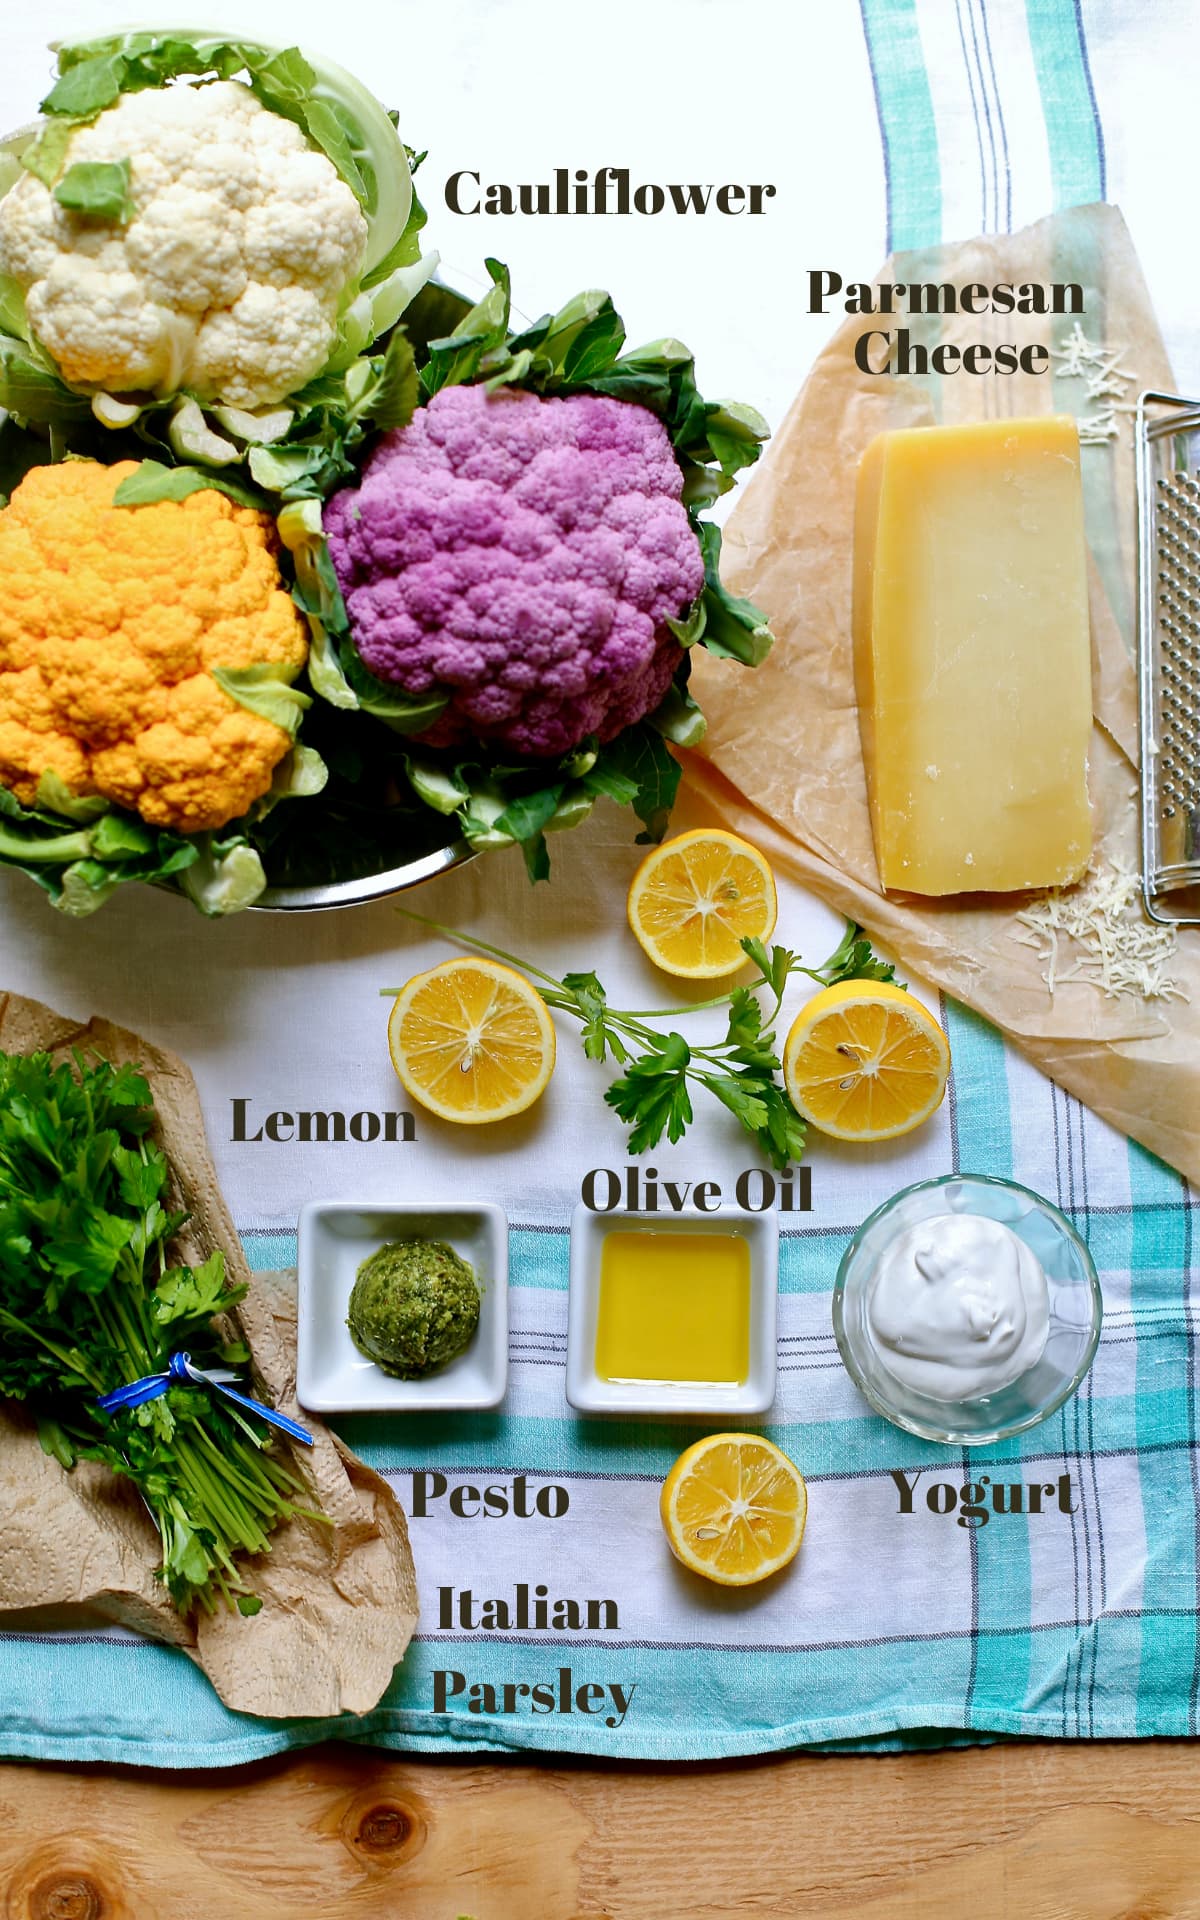 a cutting board with a list of ingredients needed for a recipe.Cauliflower, olive oil, Parmesan cheese, lemon and parsley, yogurt and pesto. 